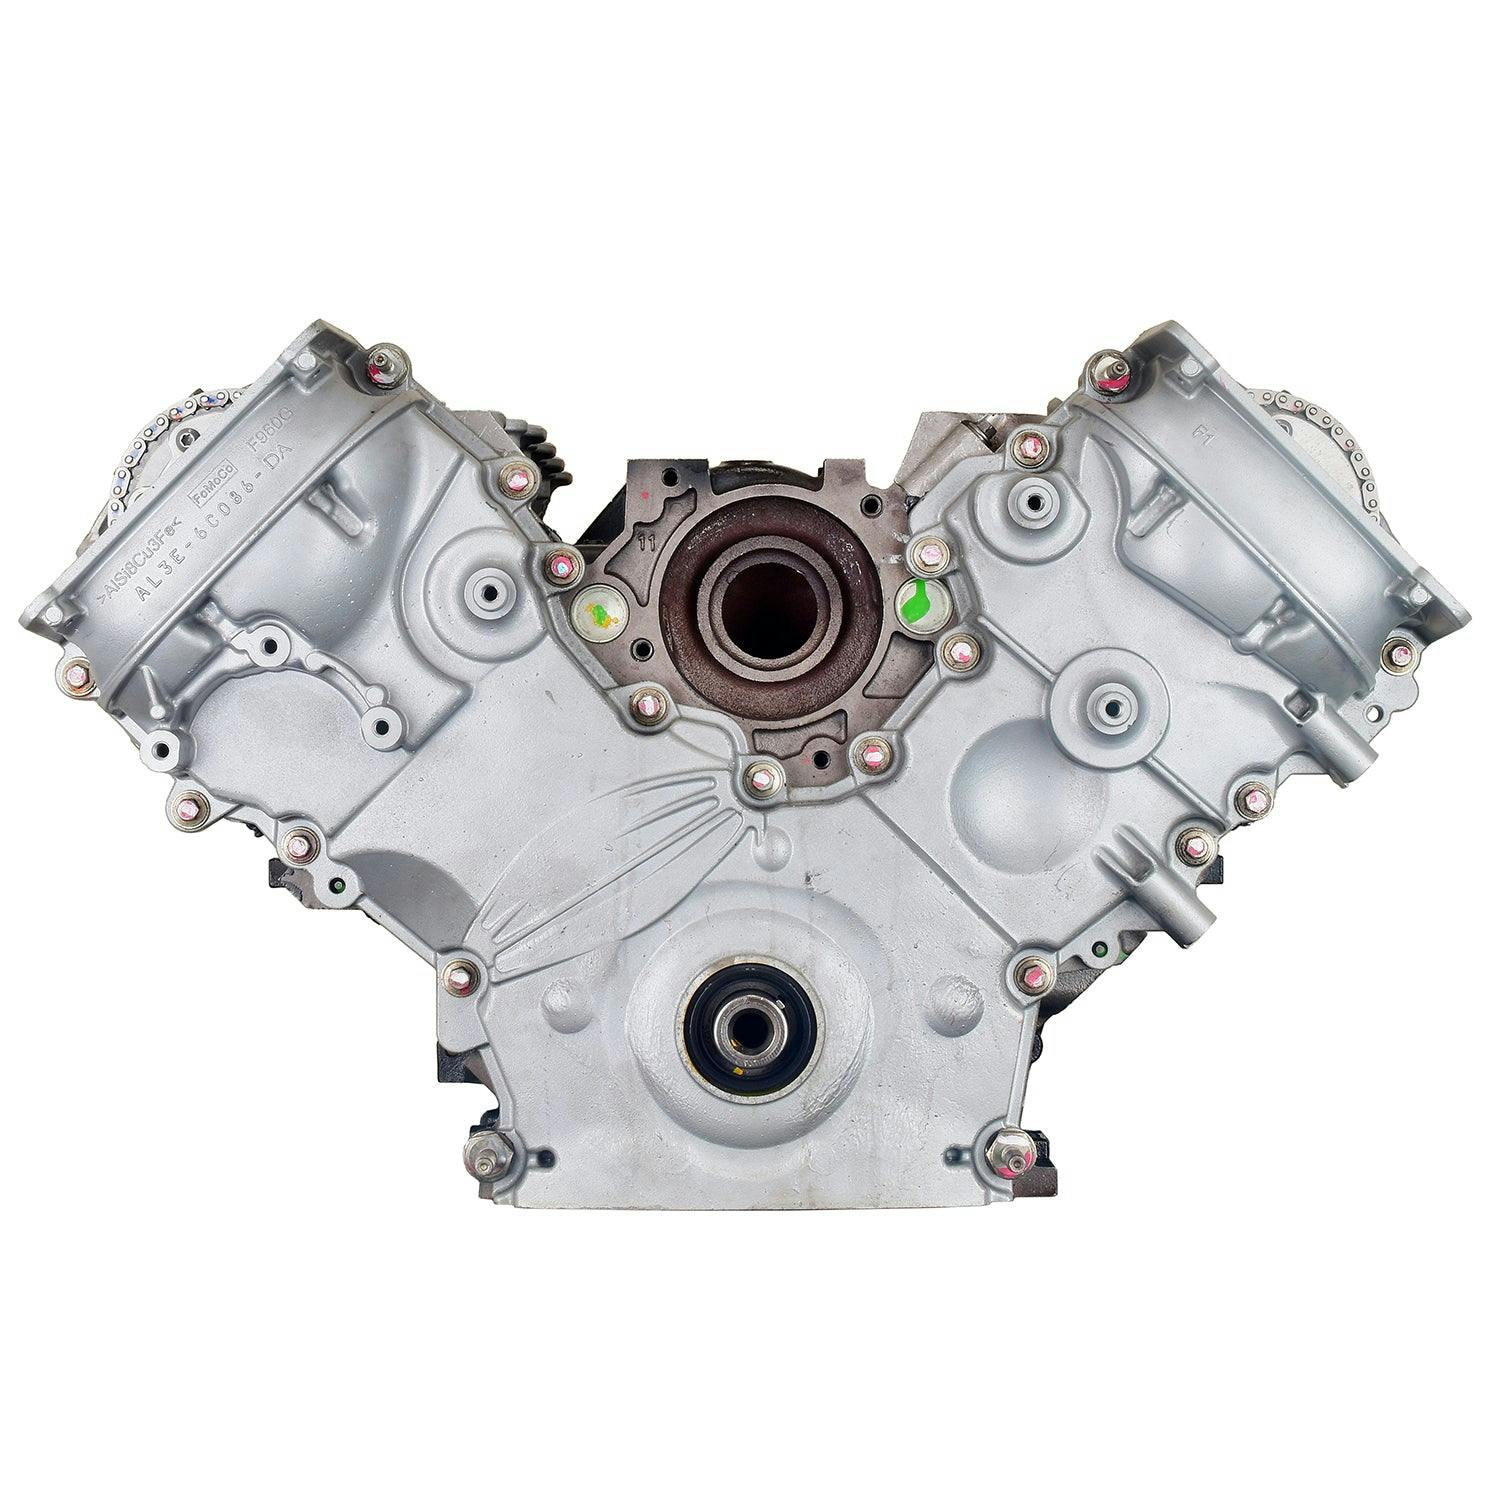 6.2L V8 Engine for 2011-2016 Ford F-250 Super Duty/F-350 Super Duty